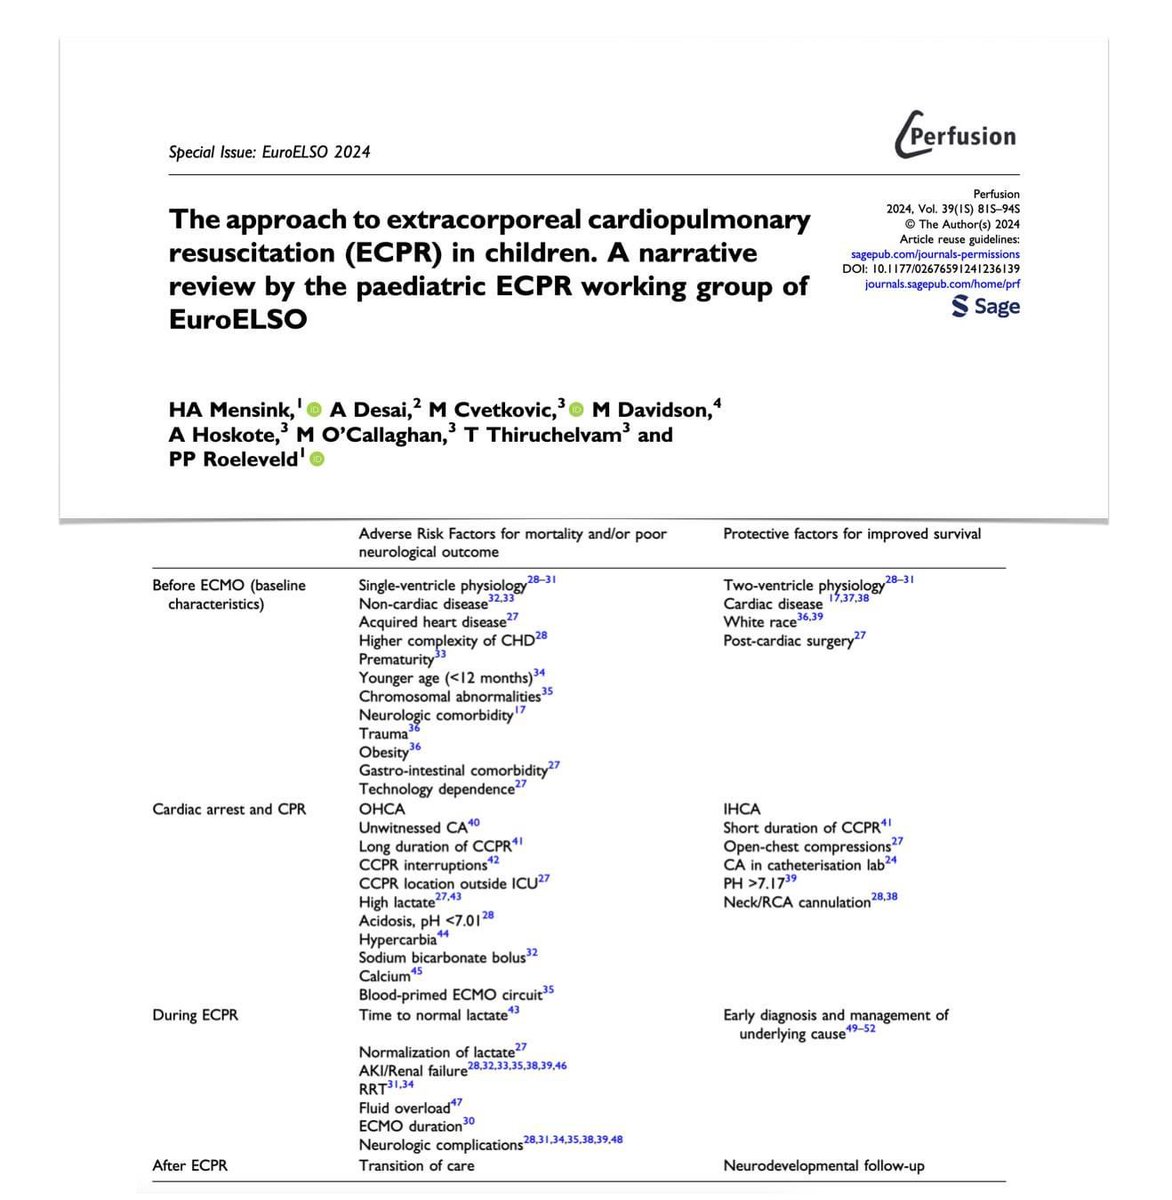 Approach to #ECPR in children 🚨 conventional #CPR 🩸 potential benefits of #ECMO 🧠 survival & neurological outcome 🏥 #ECLS for #IHCA 🚑 ECLS for #OHCA 🔮 future directions 🔓 bit.ly/3wcJu9d From the #EuroELSO2024 Perfusion special issue 🔓 journals.sagepub.com/toc/prfa/39/1_…